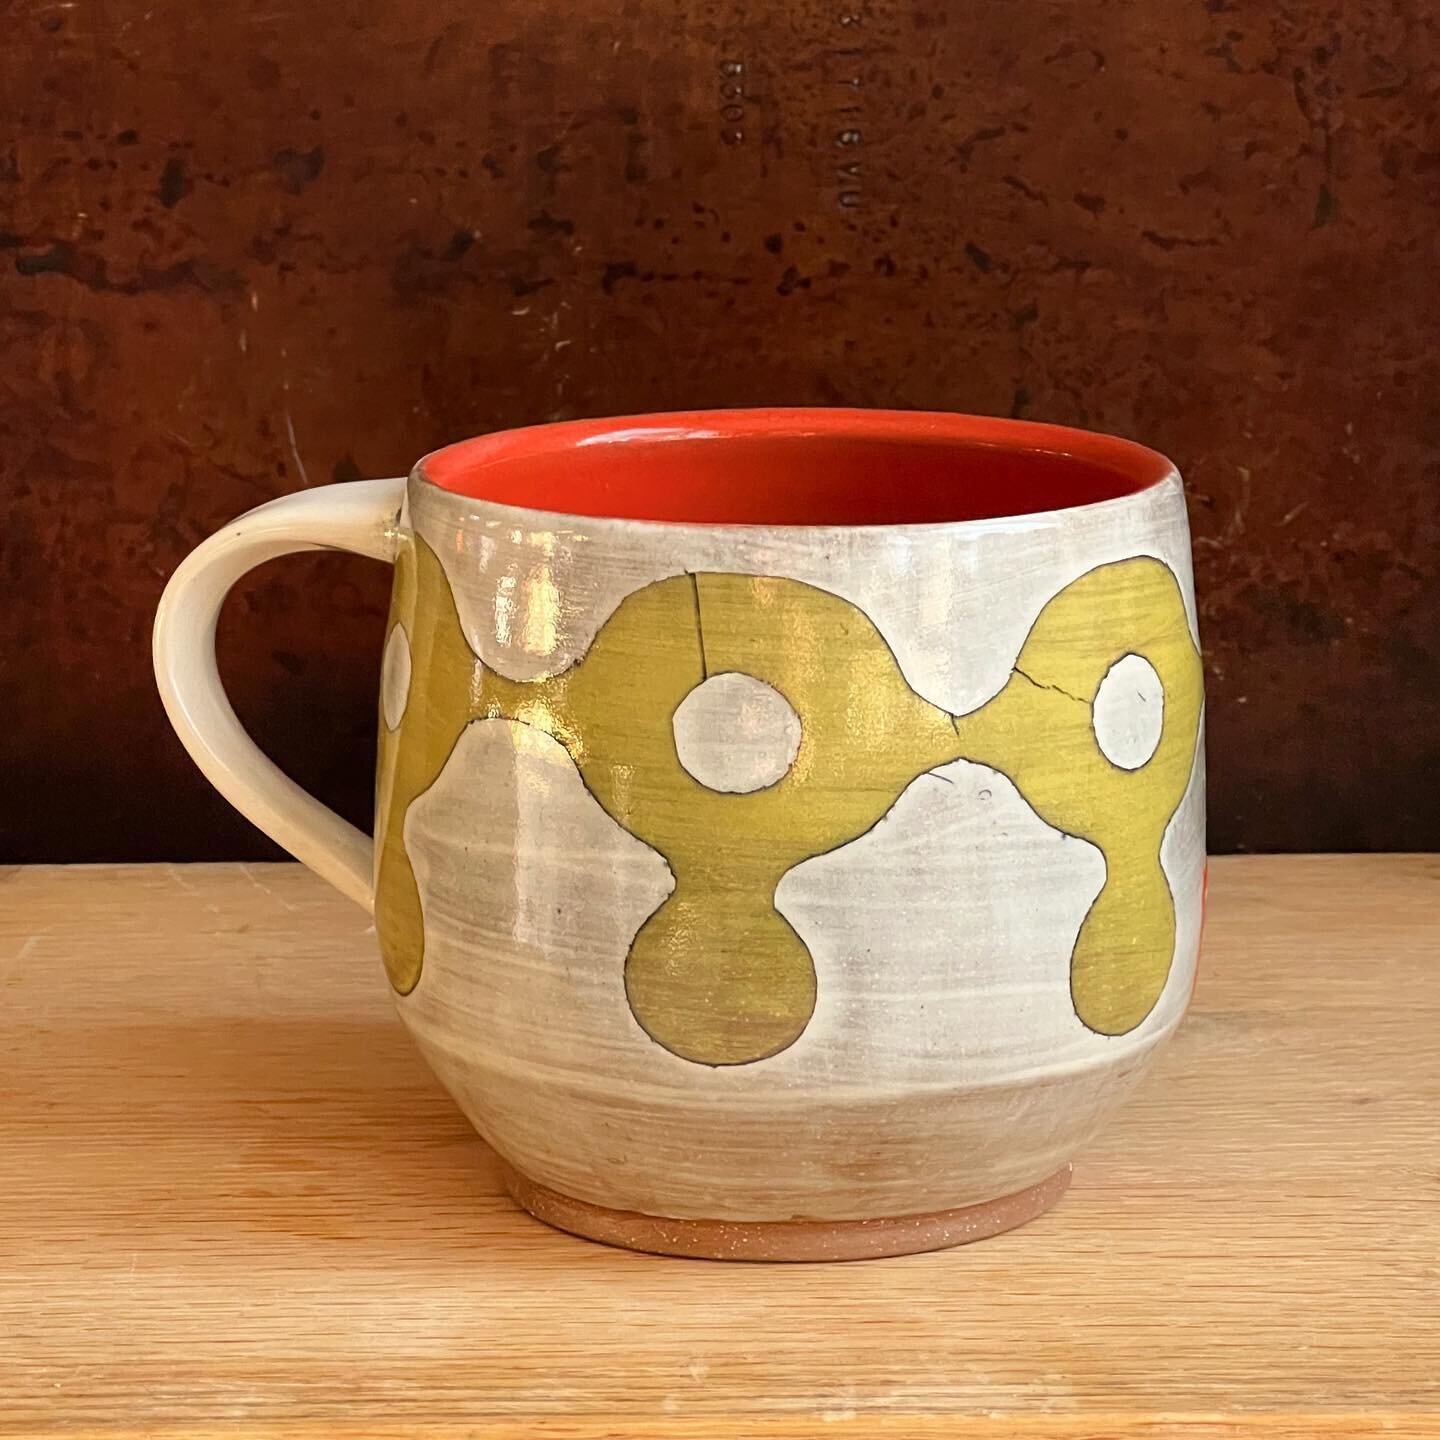 I&rsquo;ve been working on some new stuff, and have arrived at a place I&rsquo;m very happy with. You can see more in my shop update, tomorrow at noon. 🤗
.
.
#handmademug #mug #coloredslip #printonclay #graphicclay